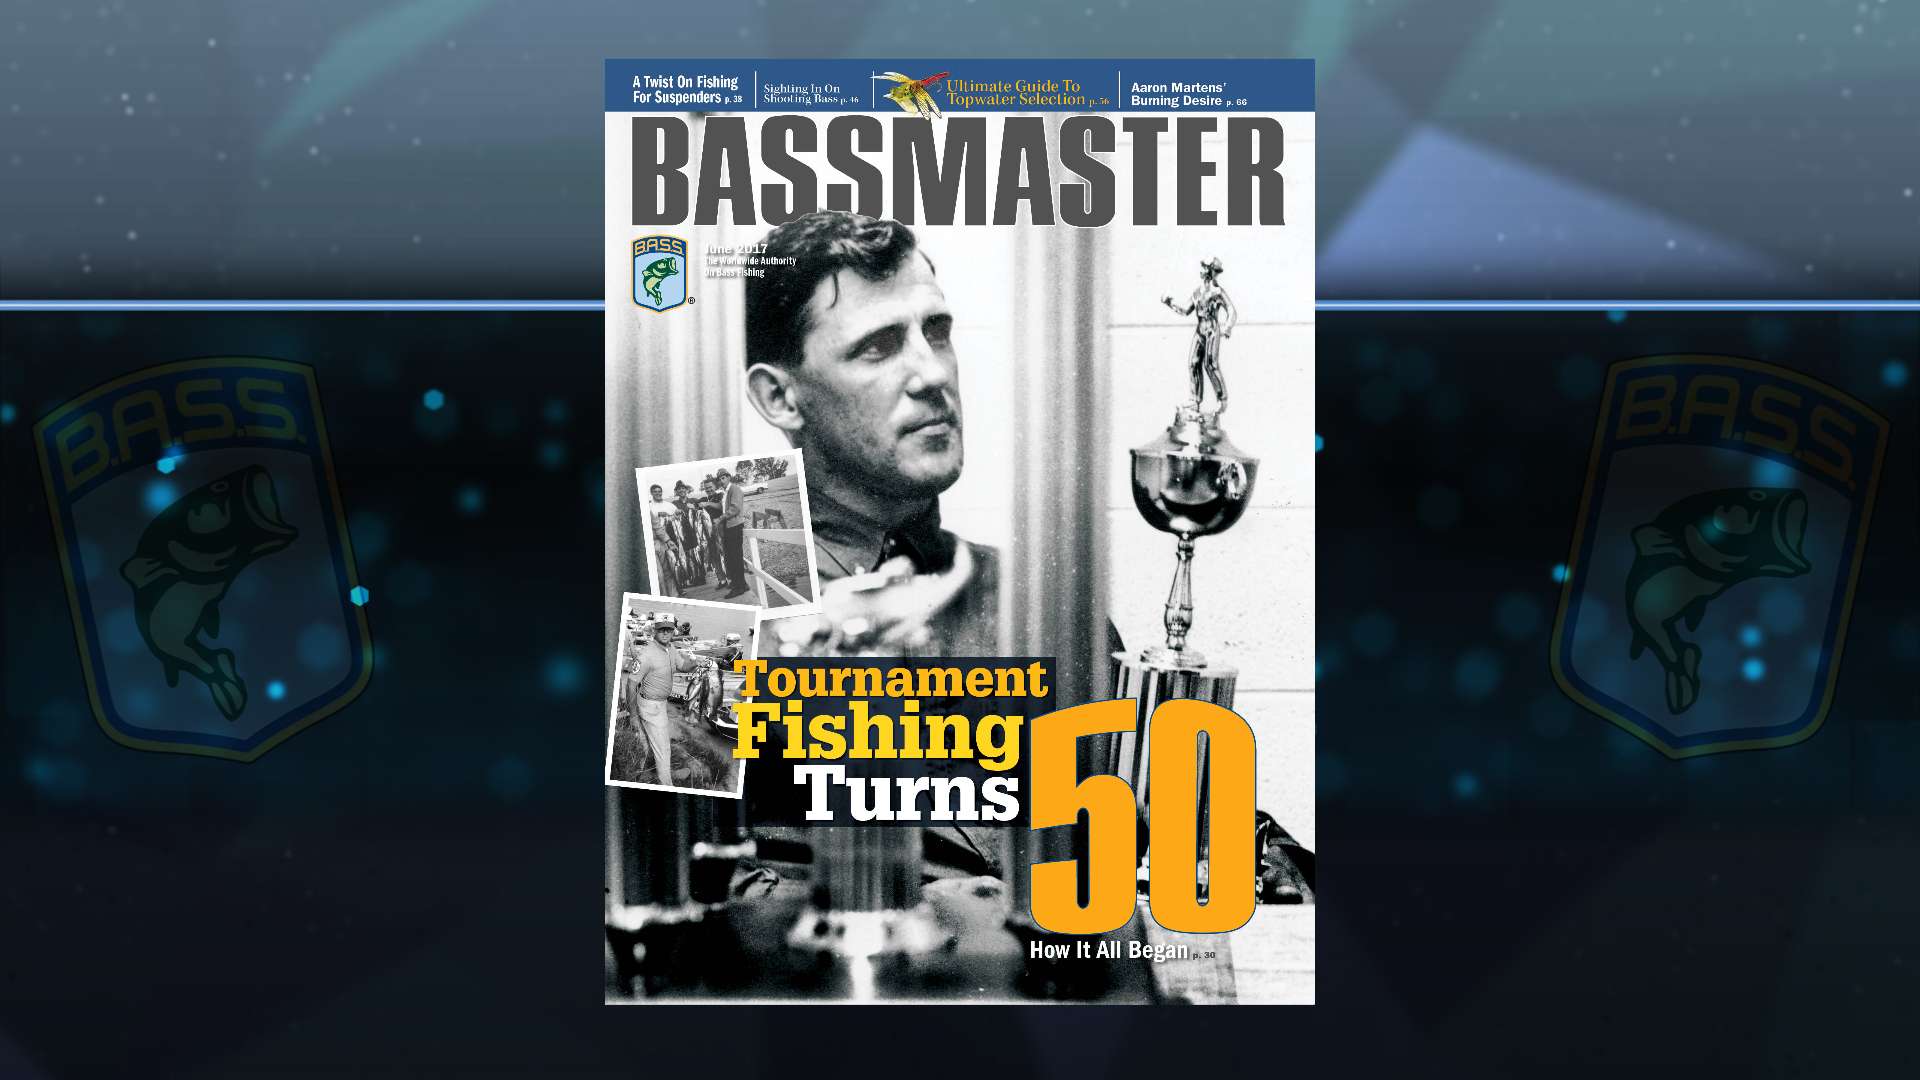 Read more about Ray Scott's first bass tournament and see additional event pictures in the June 2017 issue of <em>Bassmaster</em> Magazine.